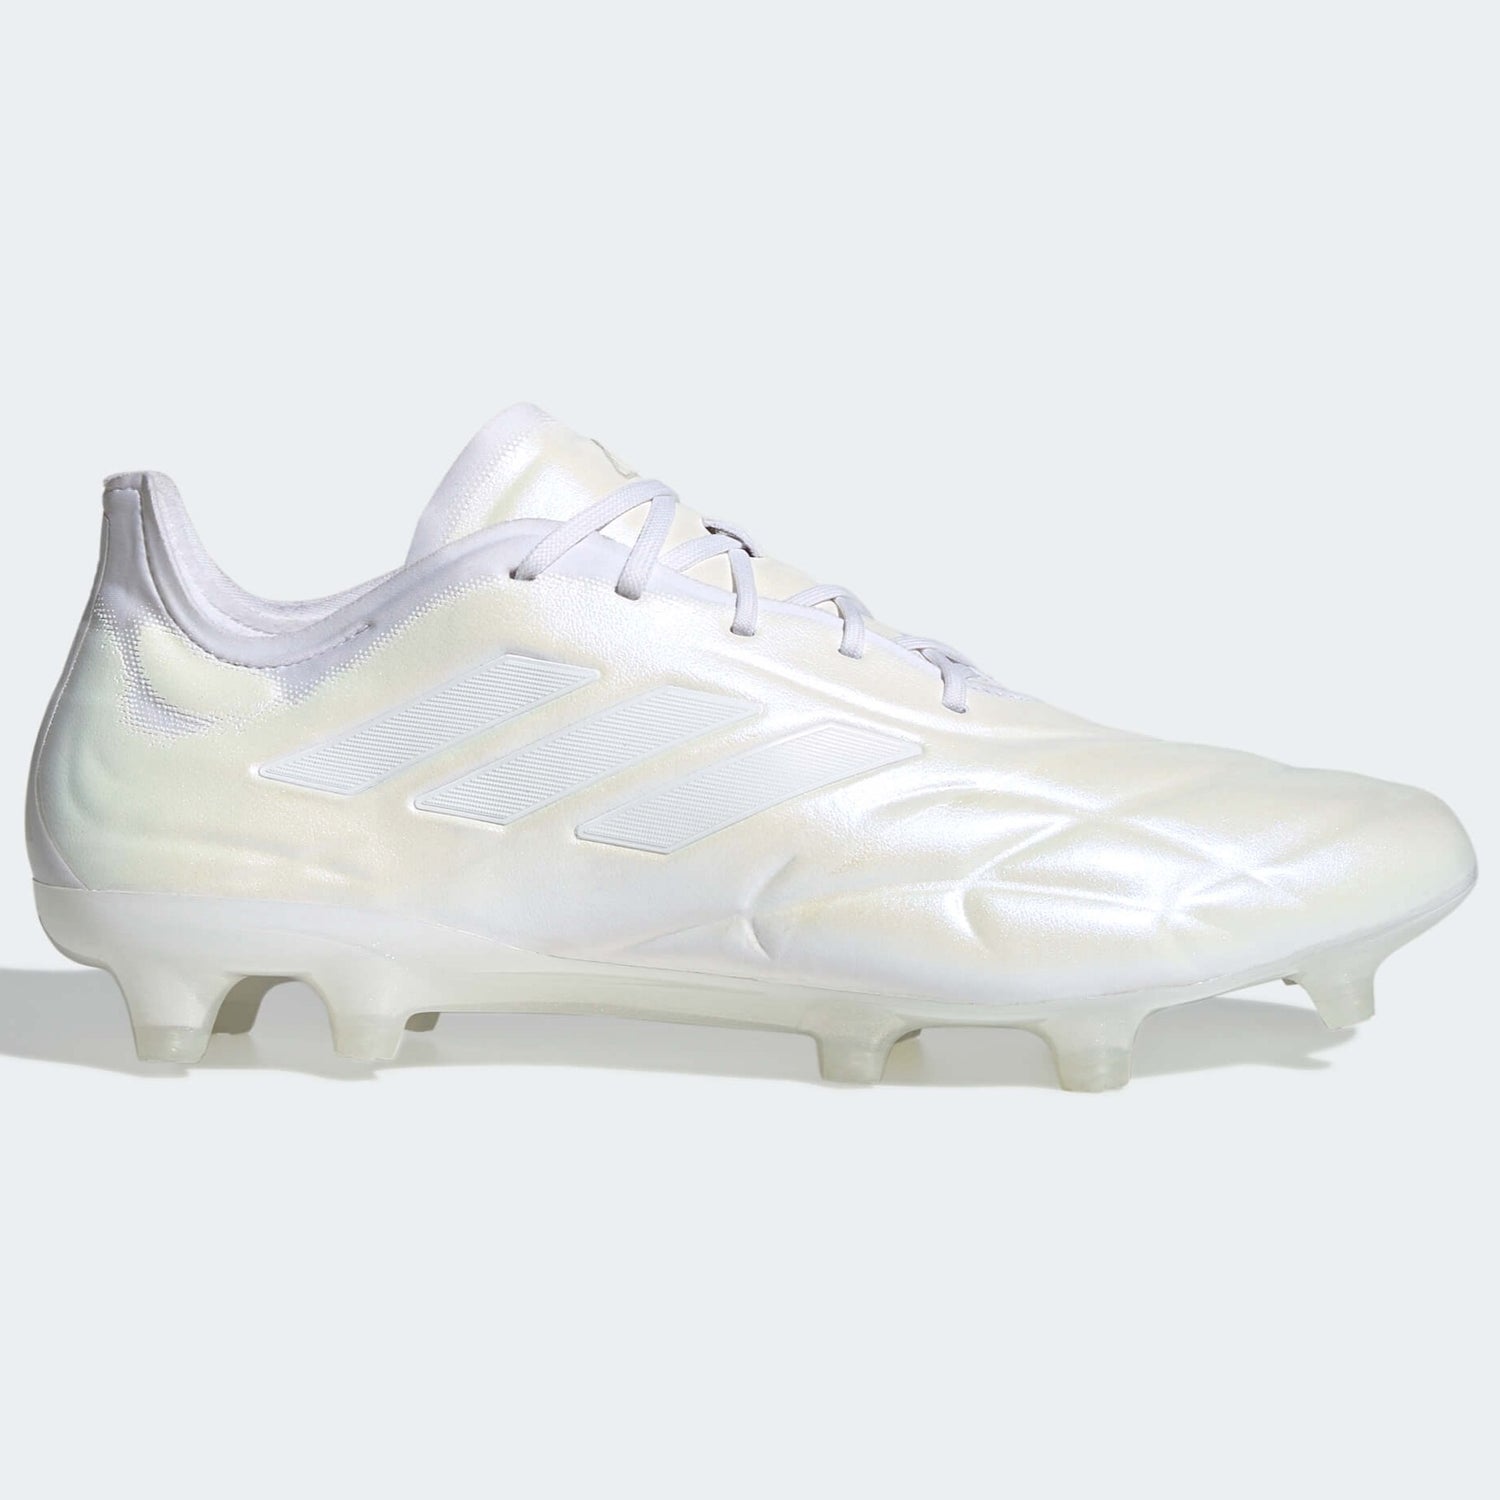 adidas Copa Pure.1 FG -  Pearlized Pack (SP23) (Side 1)